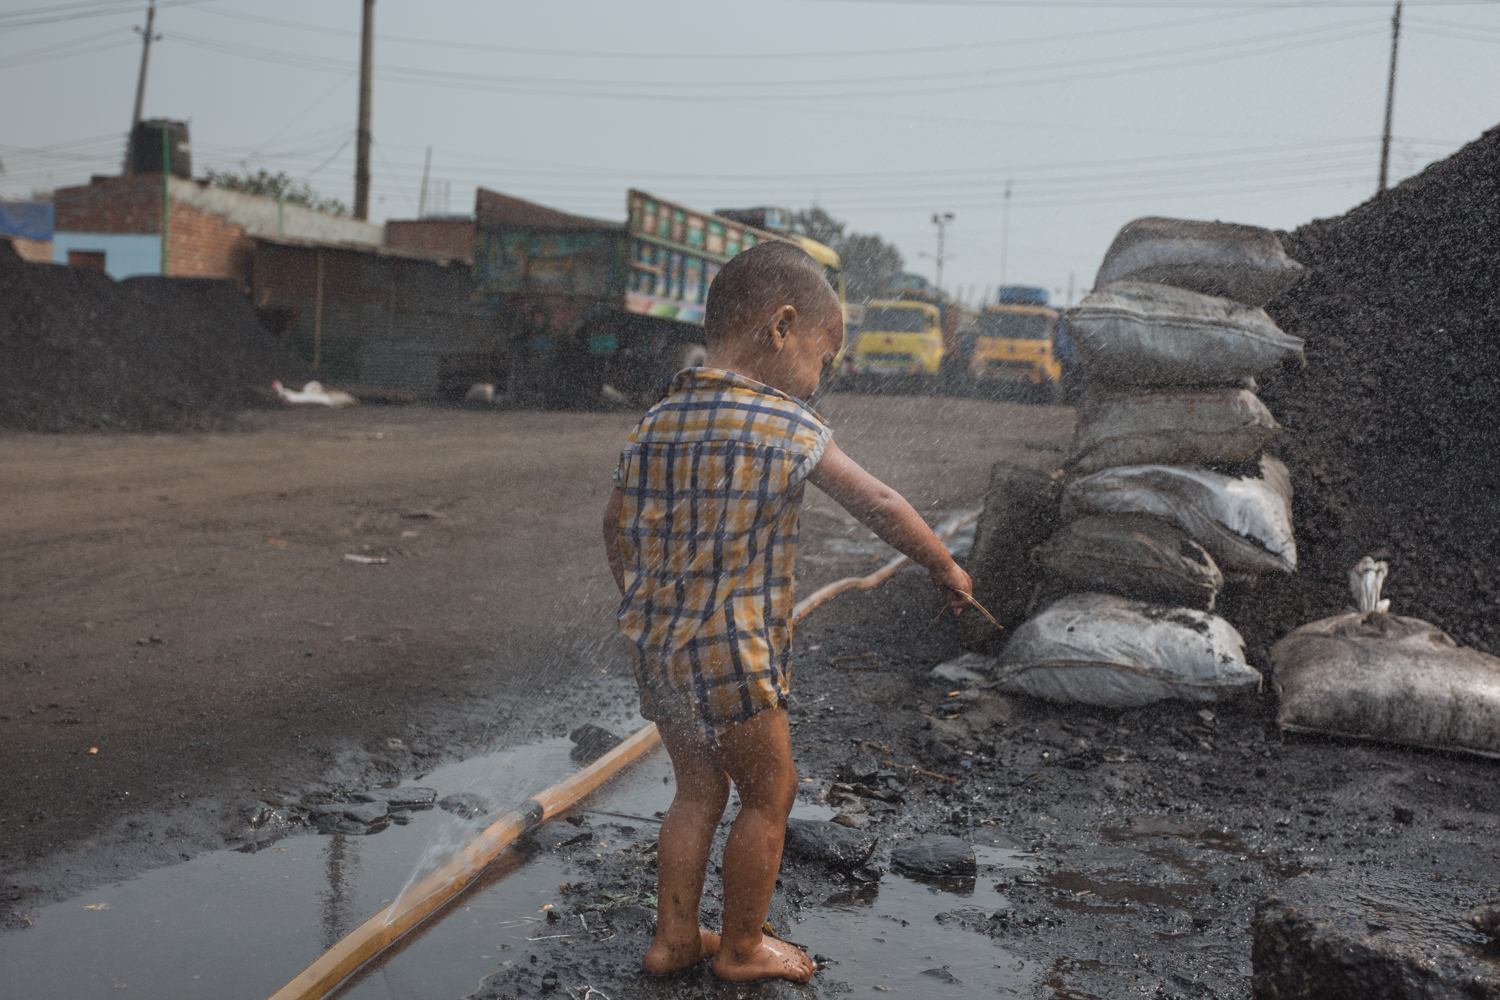 A Dhaka, Bangladesh coal worker child finds something of interest near the huge coal pile.